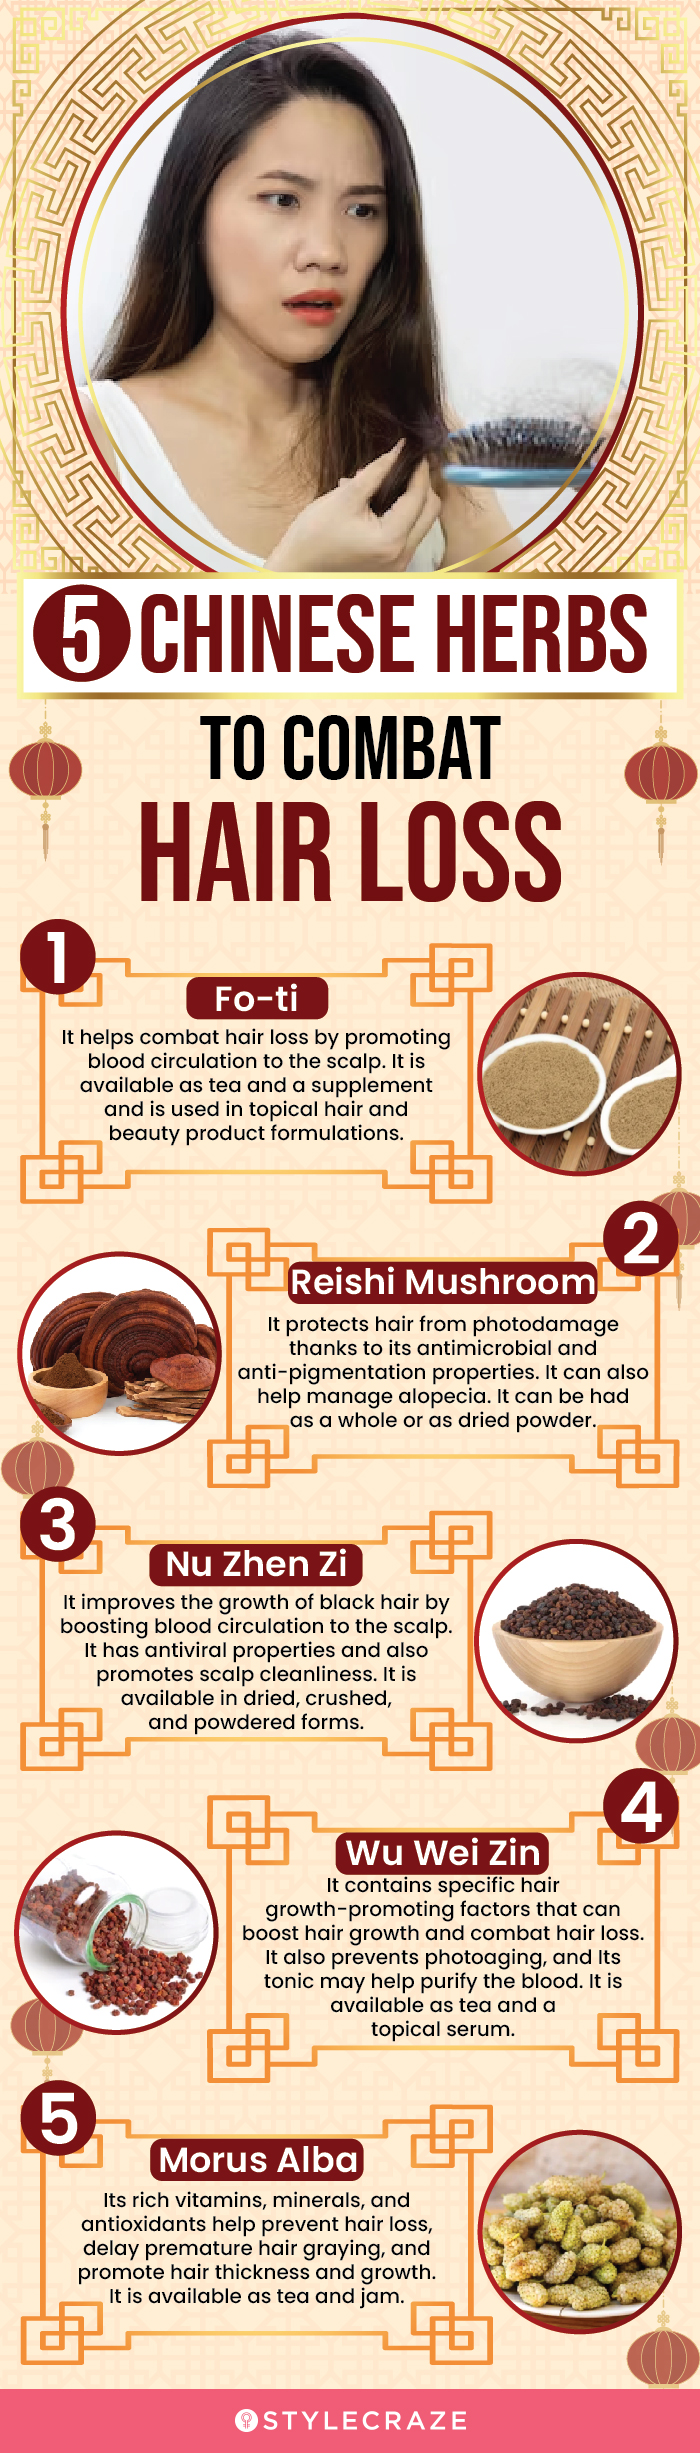 5 chinese herbs to combat hair loss (infographic)